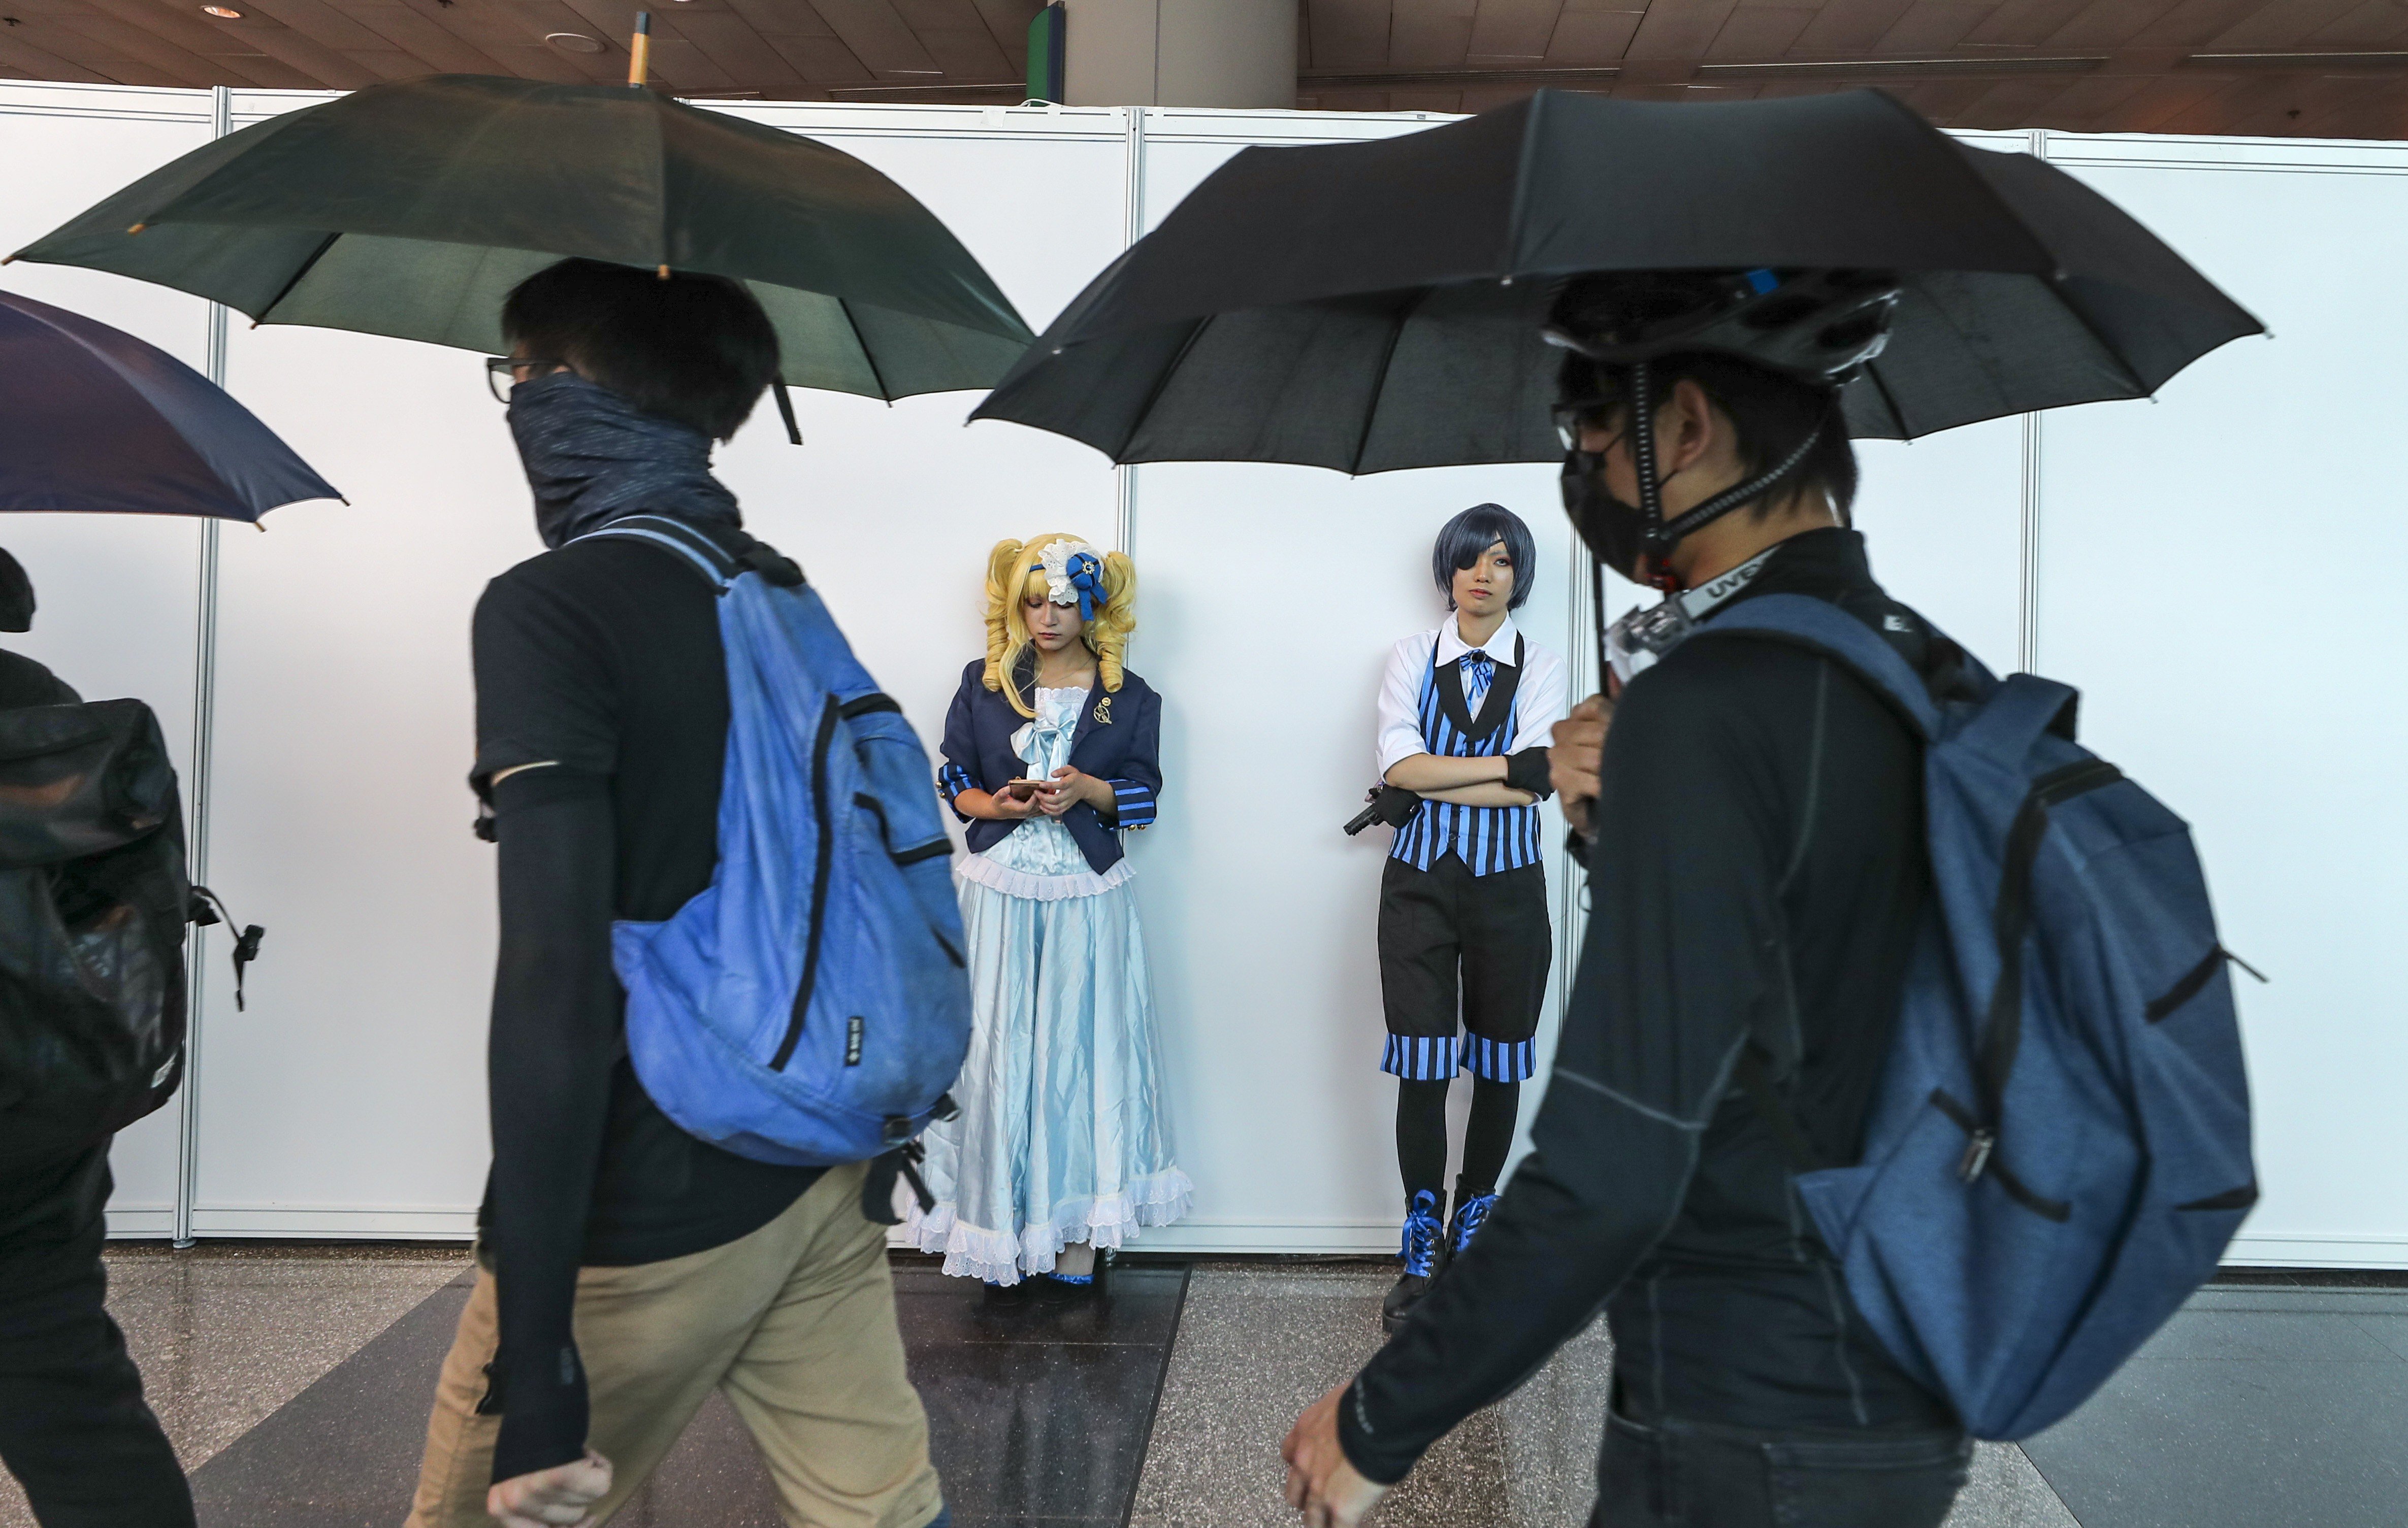 Trade show organisers are concerned that prolonged civil protests will put a damper on visitor numbers at upcoming events this autumn. Protesters at the convention centre in Wan Chai march during an animation, comics and games expo on July 28, 2019. Photo: Sam Tsang